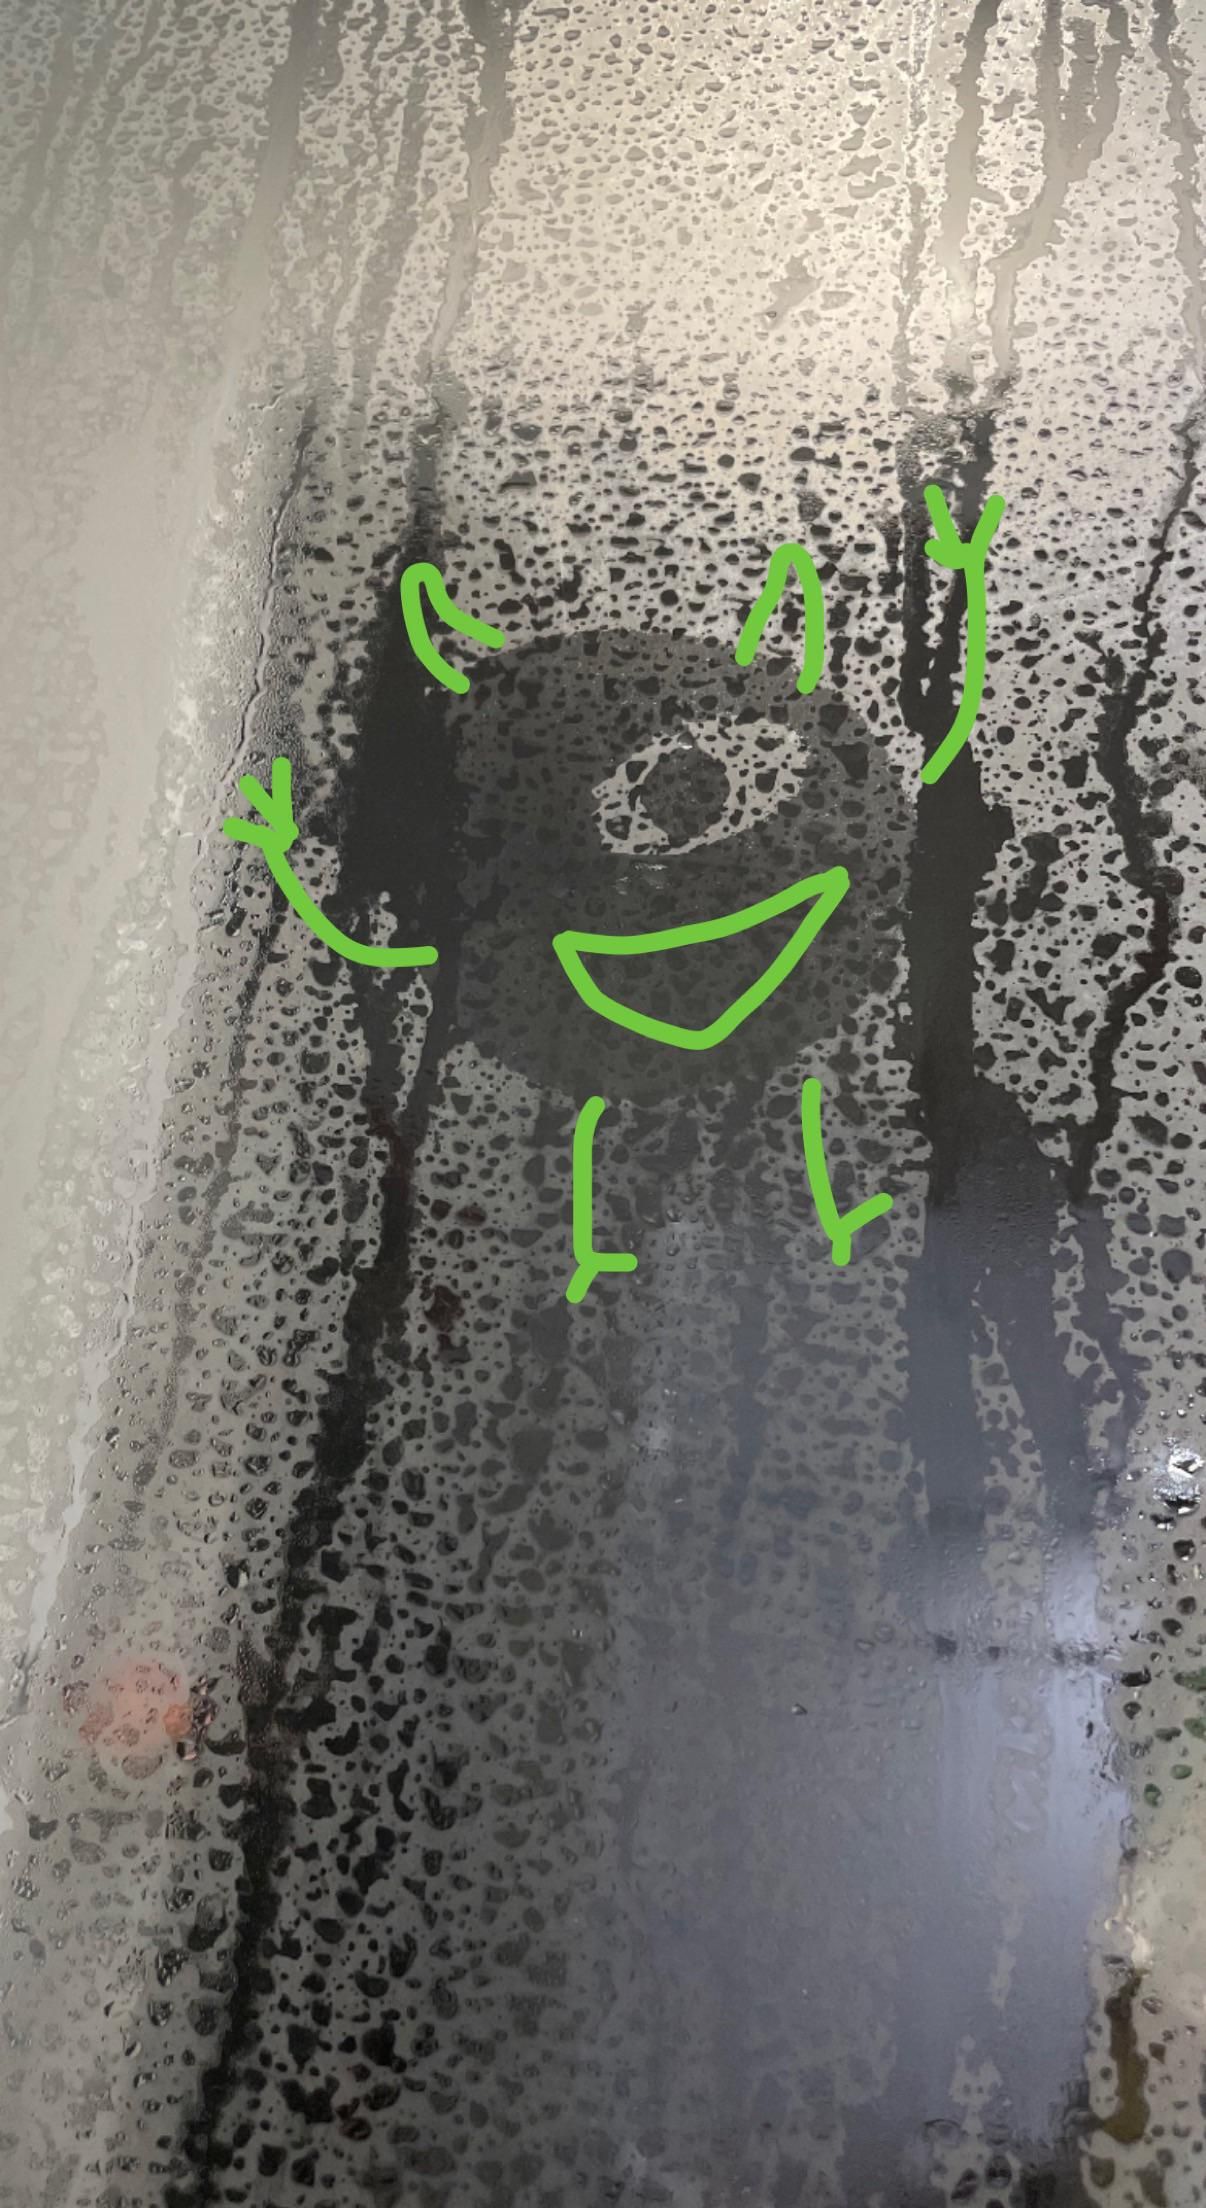 If i press my boob on the steamy shower glass it makes a lil mike wazowski body, please enjoy as much as i did